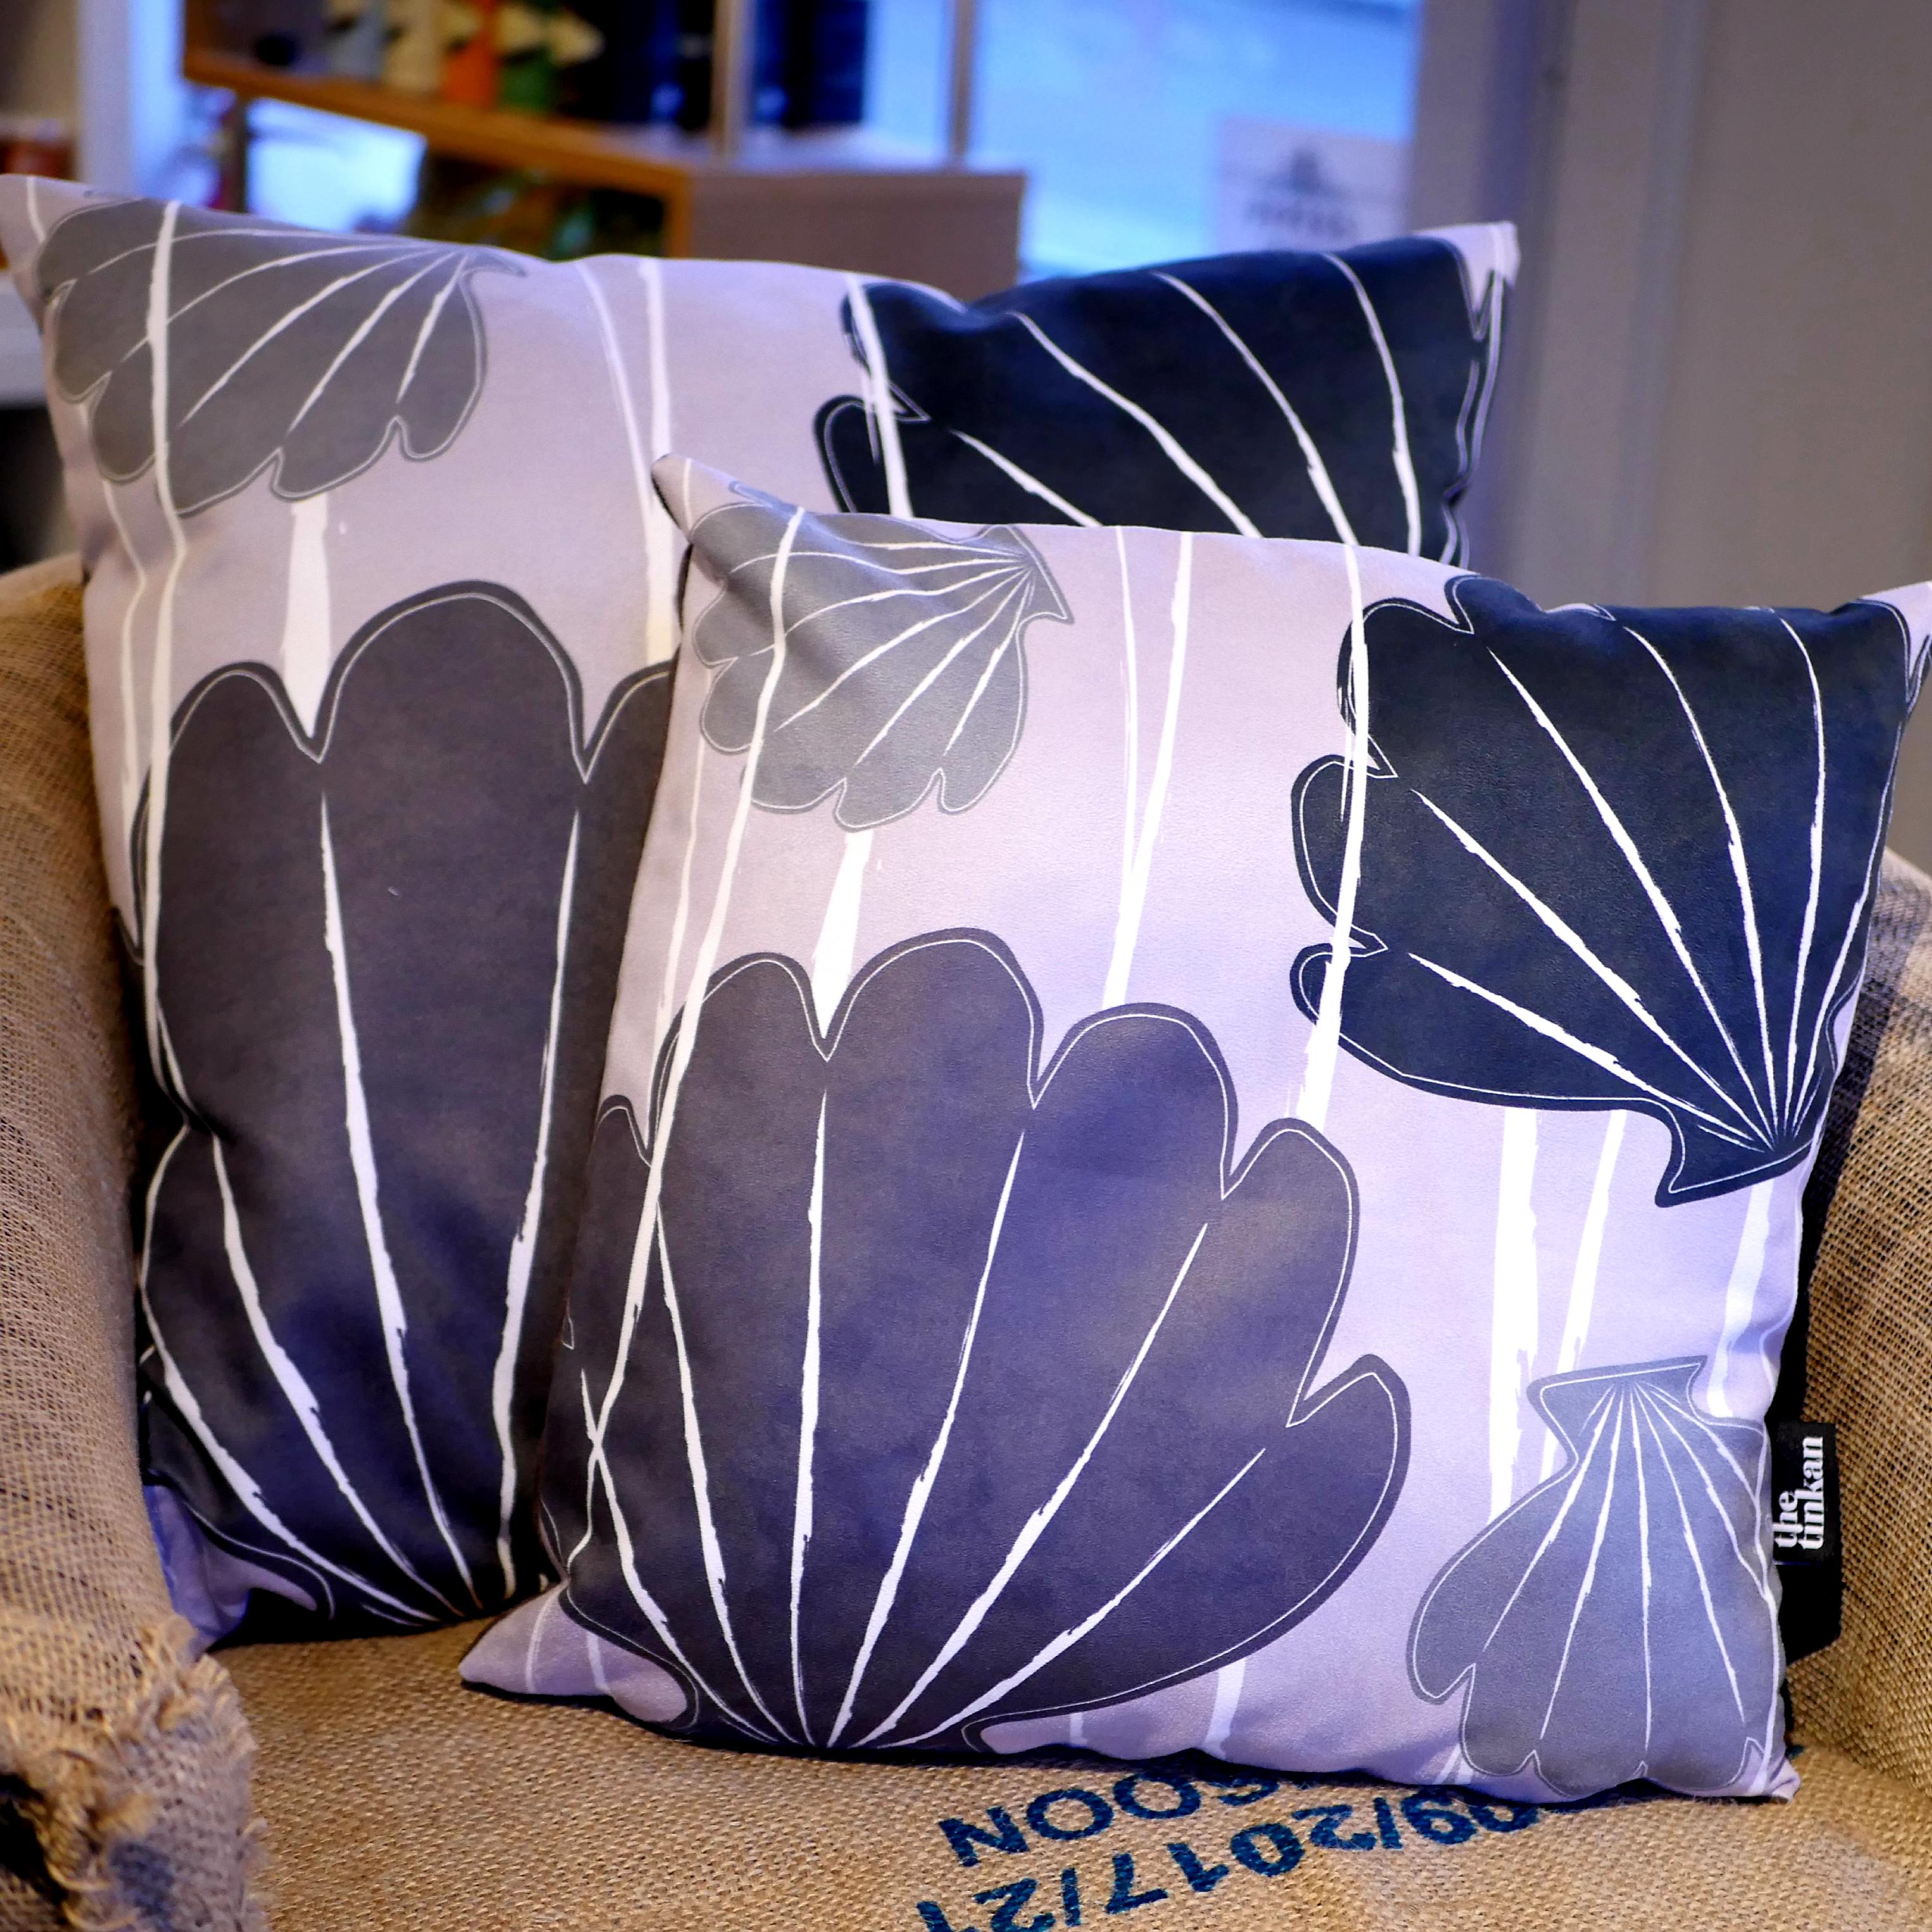 Black, charcoal grey & light grey faux suede soft feel Abstract Shells Cushions, 43cm & 57cm square, with luxury inner pads designed by thetinkan. VIEW PRODUCT >>